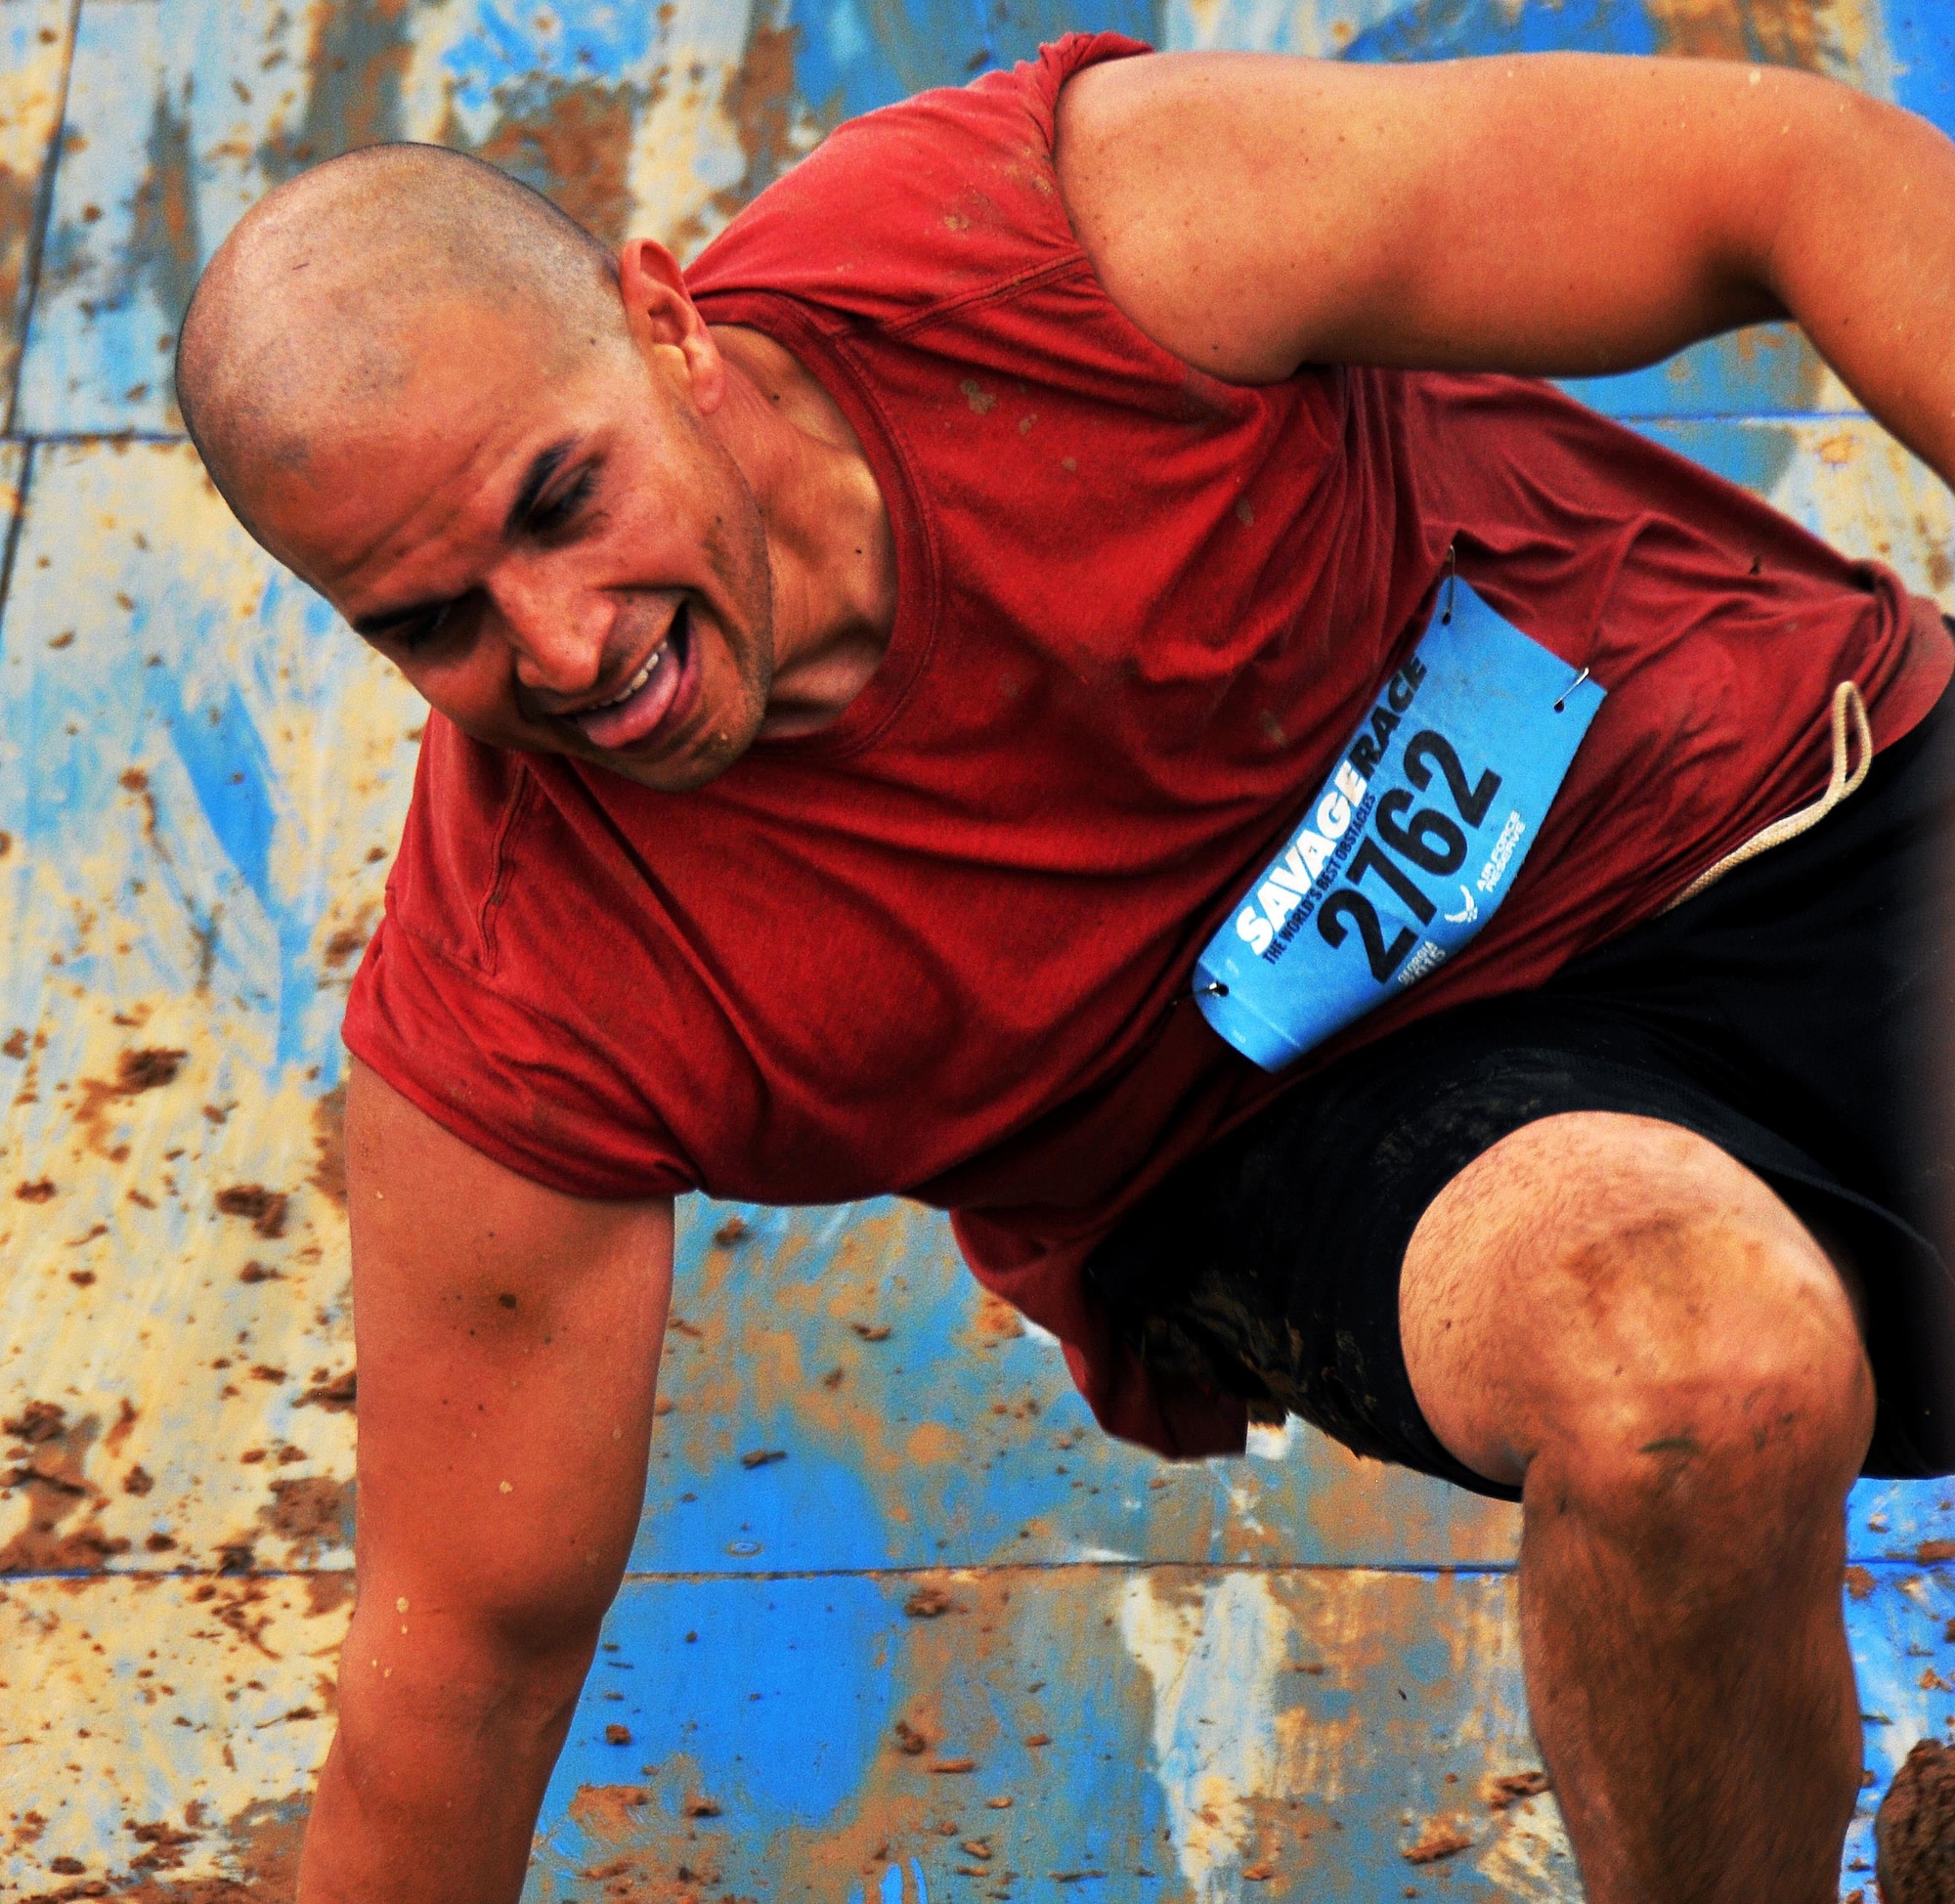 Staff Sgt. Luis Pluguez, 94th Aeromedical Staging Squadron, slides down a wall after a failed attempt at climbing the Colossus during the Georgia Spring 2015 Savage Race in Dallas, Ga., April 18, 2015. The Colossus was a giant 43-foot wall and one of the hardest obstacles in the course. Adding to the difficulty of it being one of the final obstacles, runners had to sprint up the barrier after they’d already sledged through more than four miles in the mud, before grabbing a rope. They would then pull themselves up to the top of the fortification. The Savage Race is an Air Force Reserve sponsored obstacle course that challenges participants in more than 20 different trials over the course of five miles. (U.S. Air Force photo/Senior Airman Daniel Phelps)